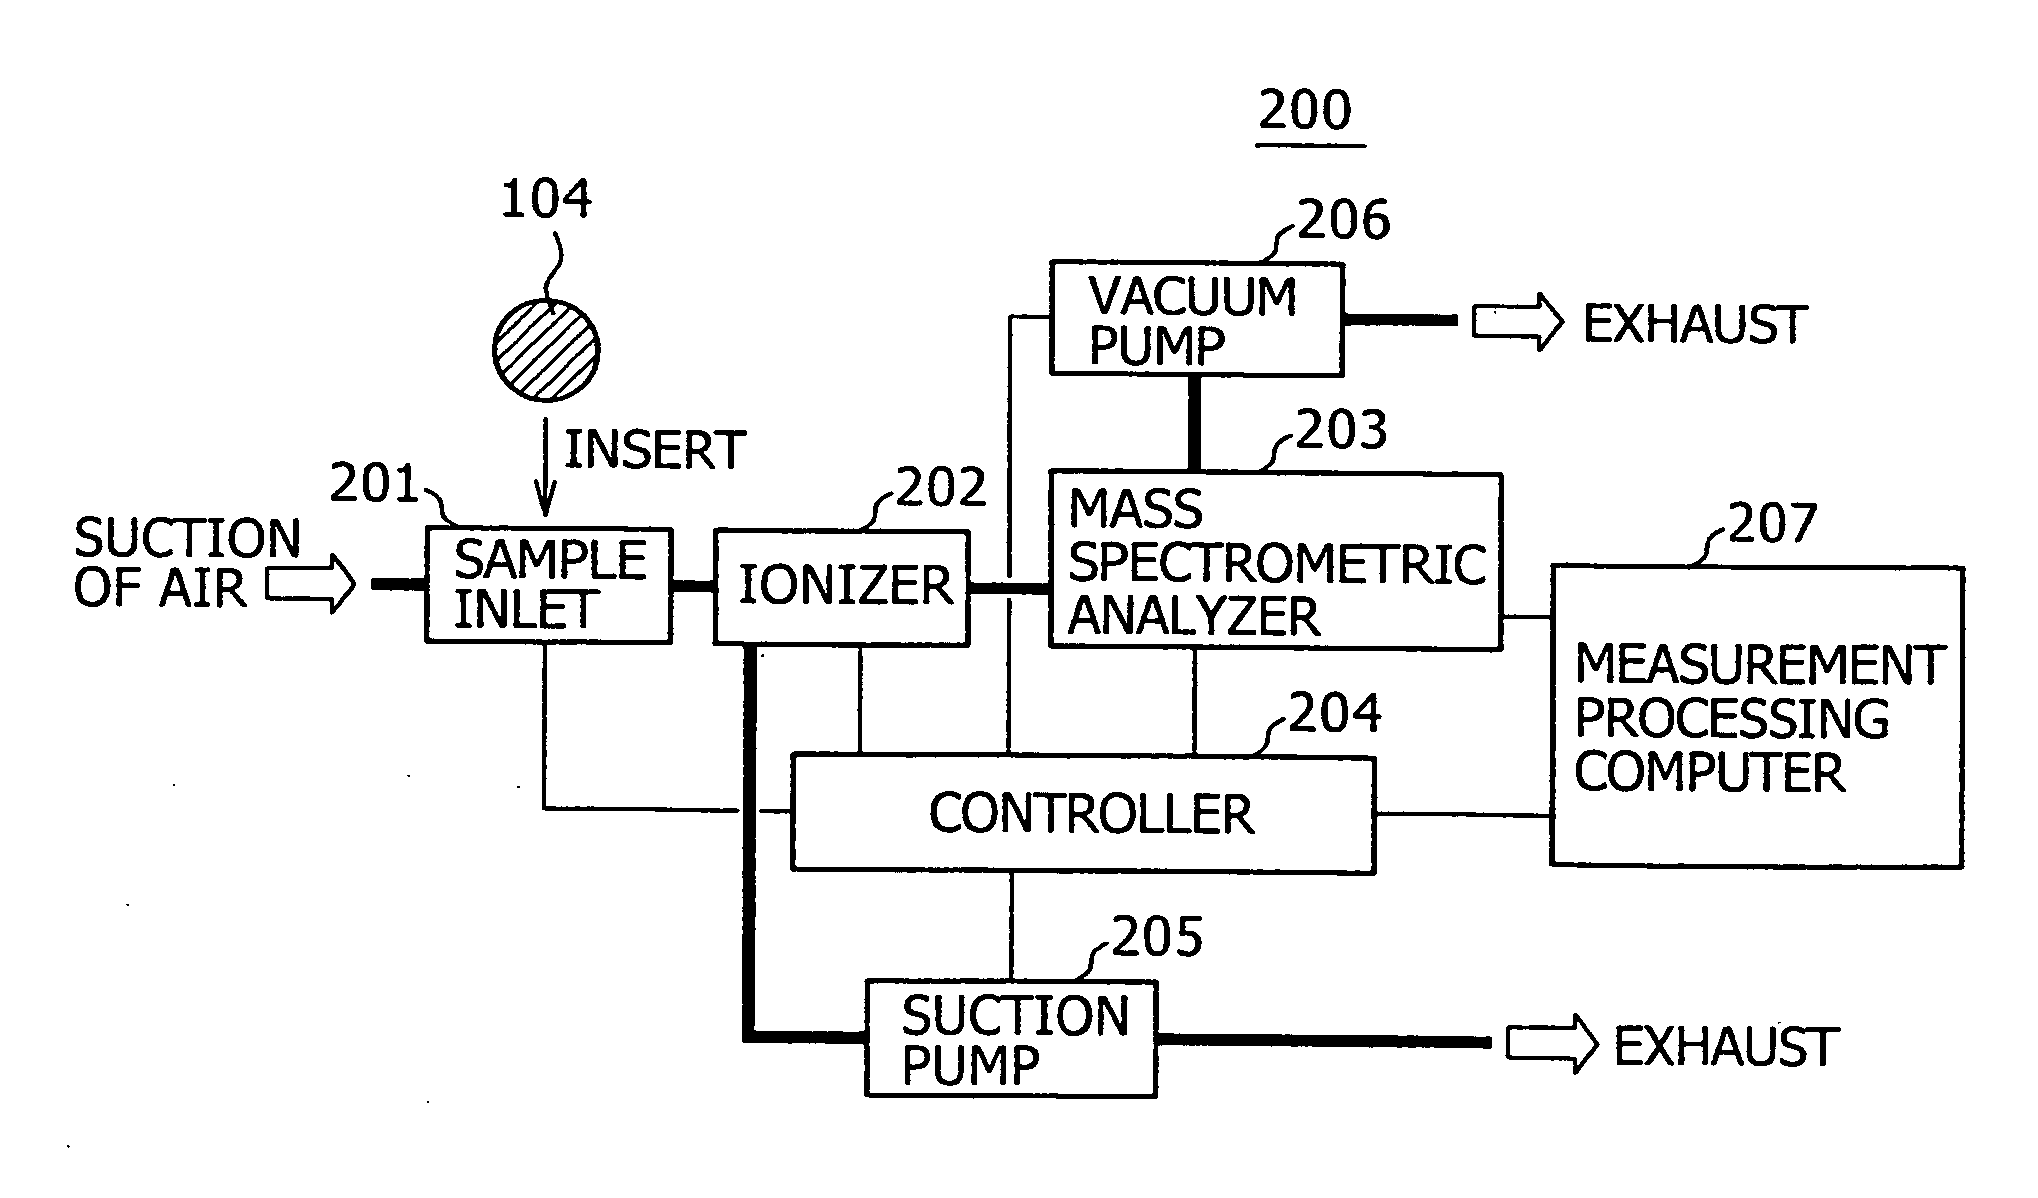 Apparatus and method for detecting threats